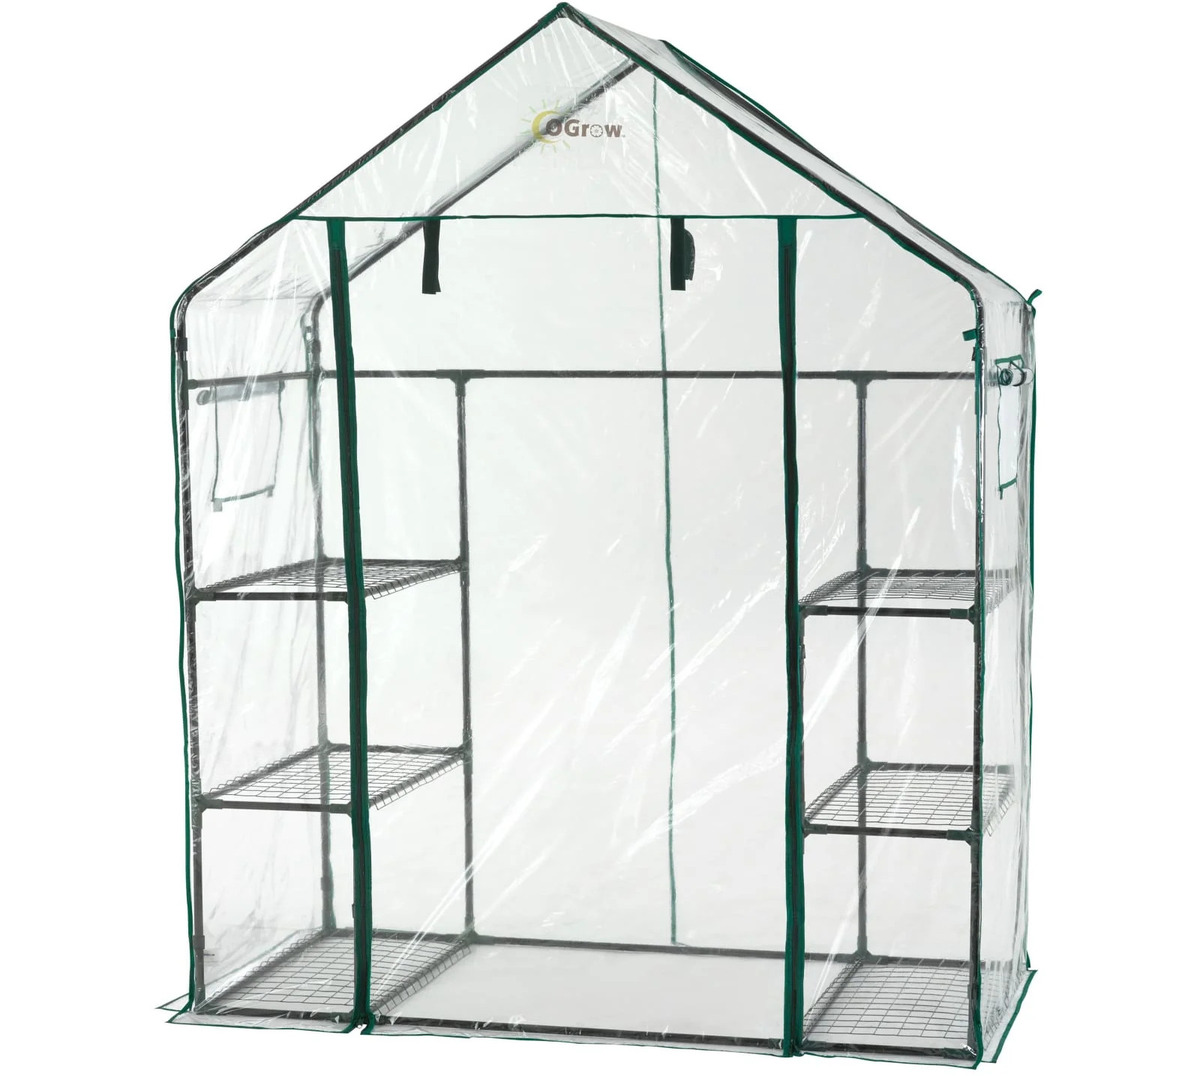 11 Unbelievable Ogrow Greenhouse for 2023